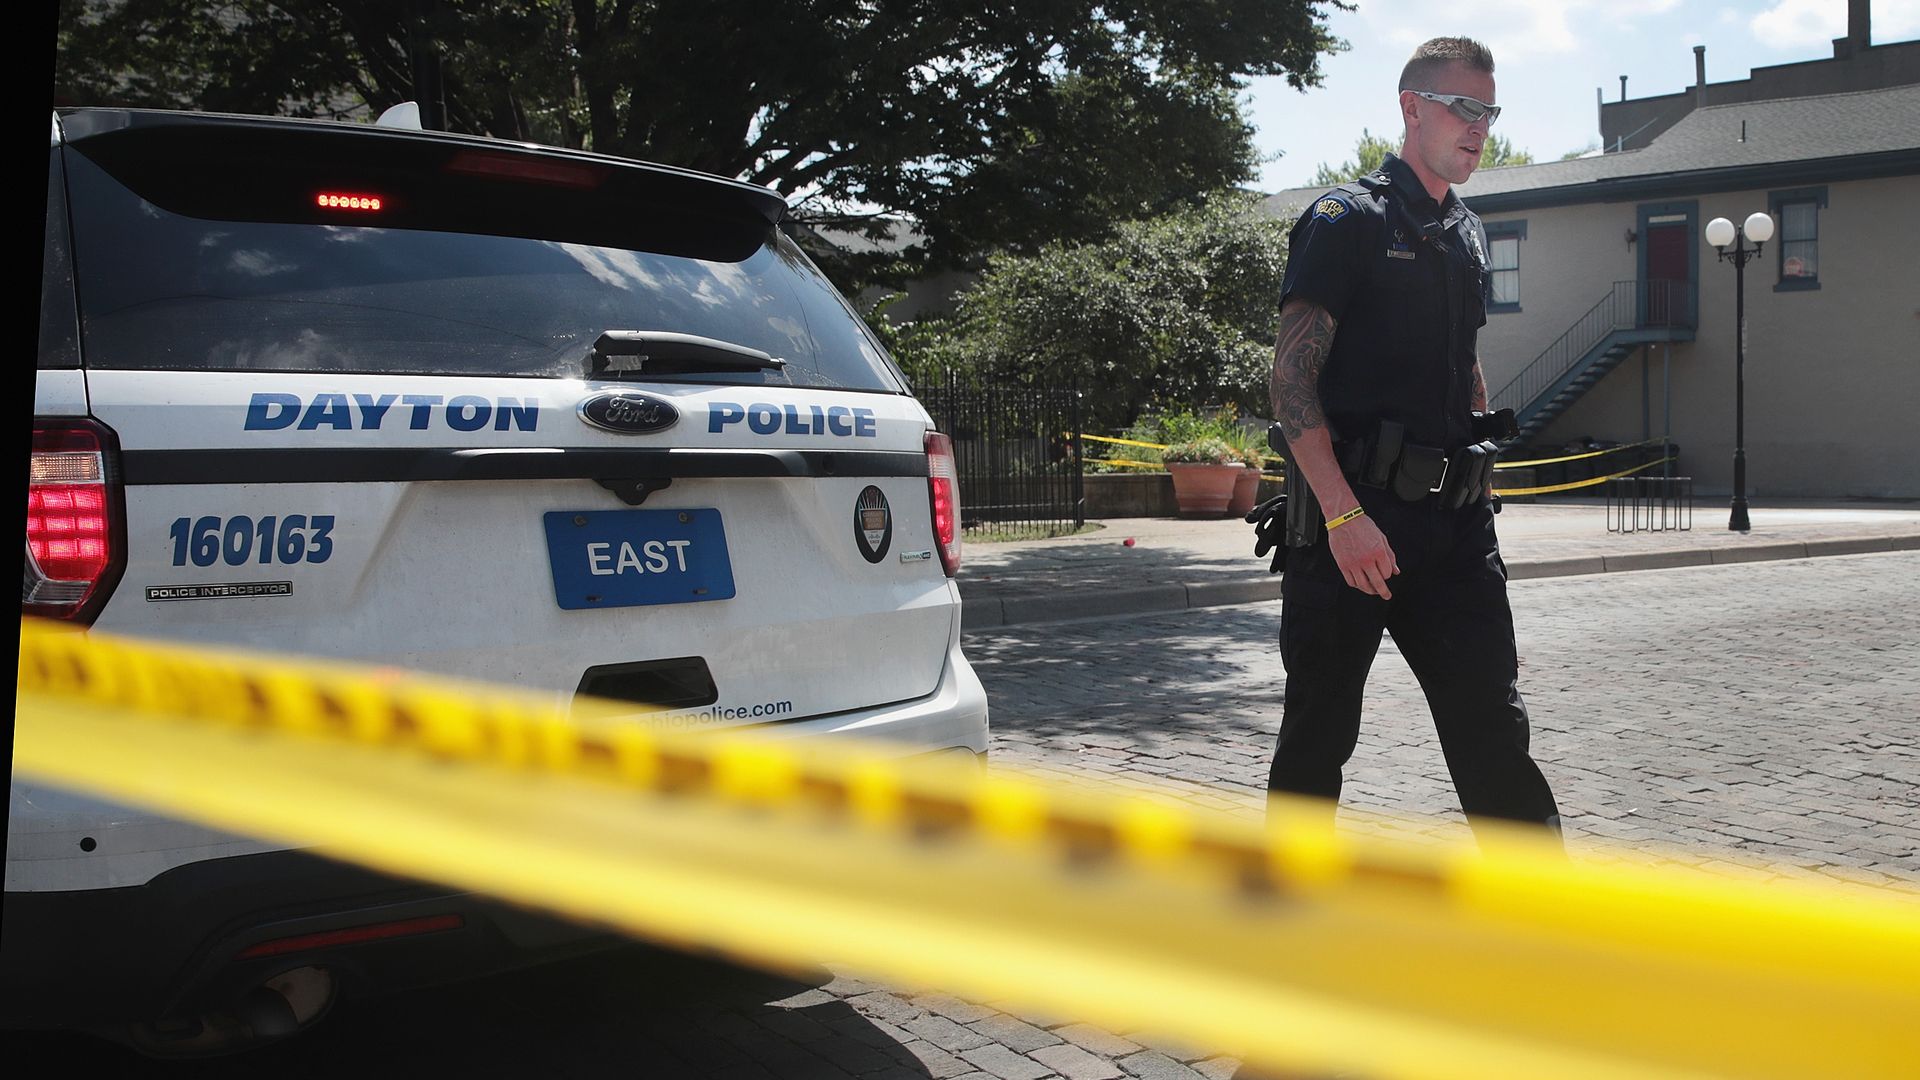 Police officer at the shooting scene in Dayton, Ohio. Photo: Scott Olson/Getty Images